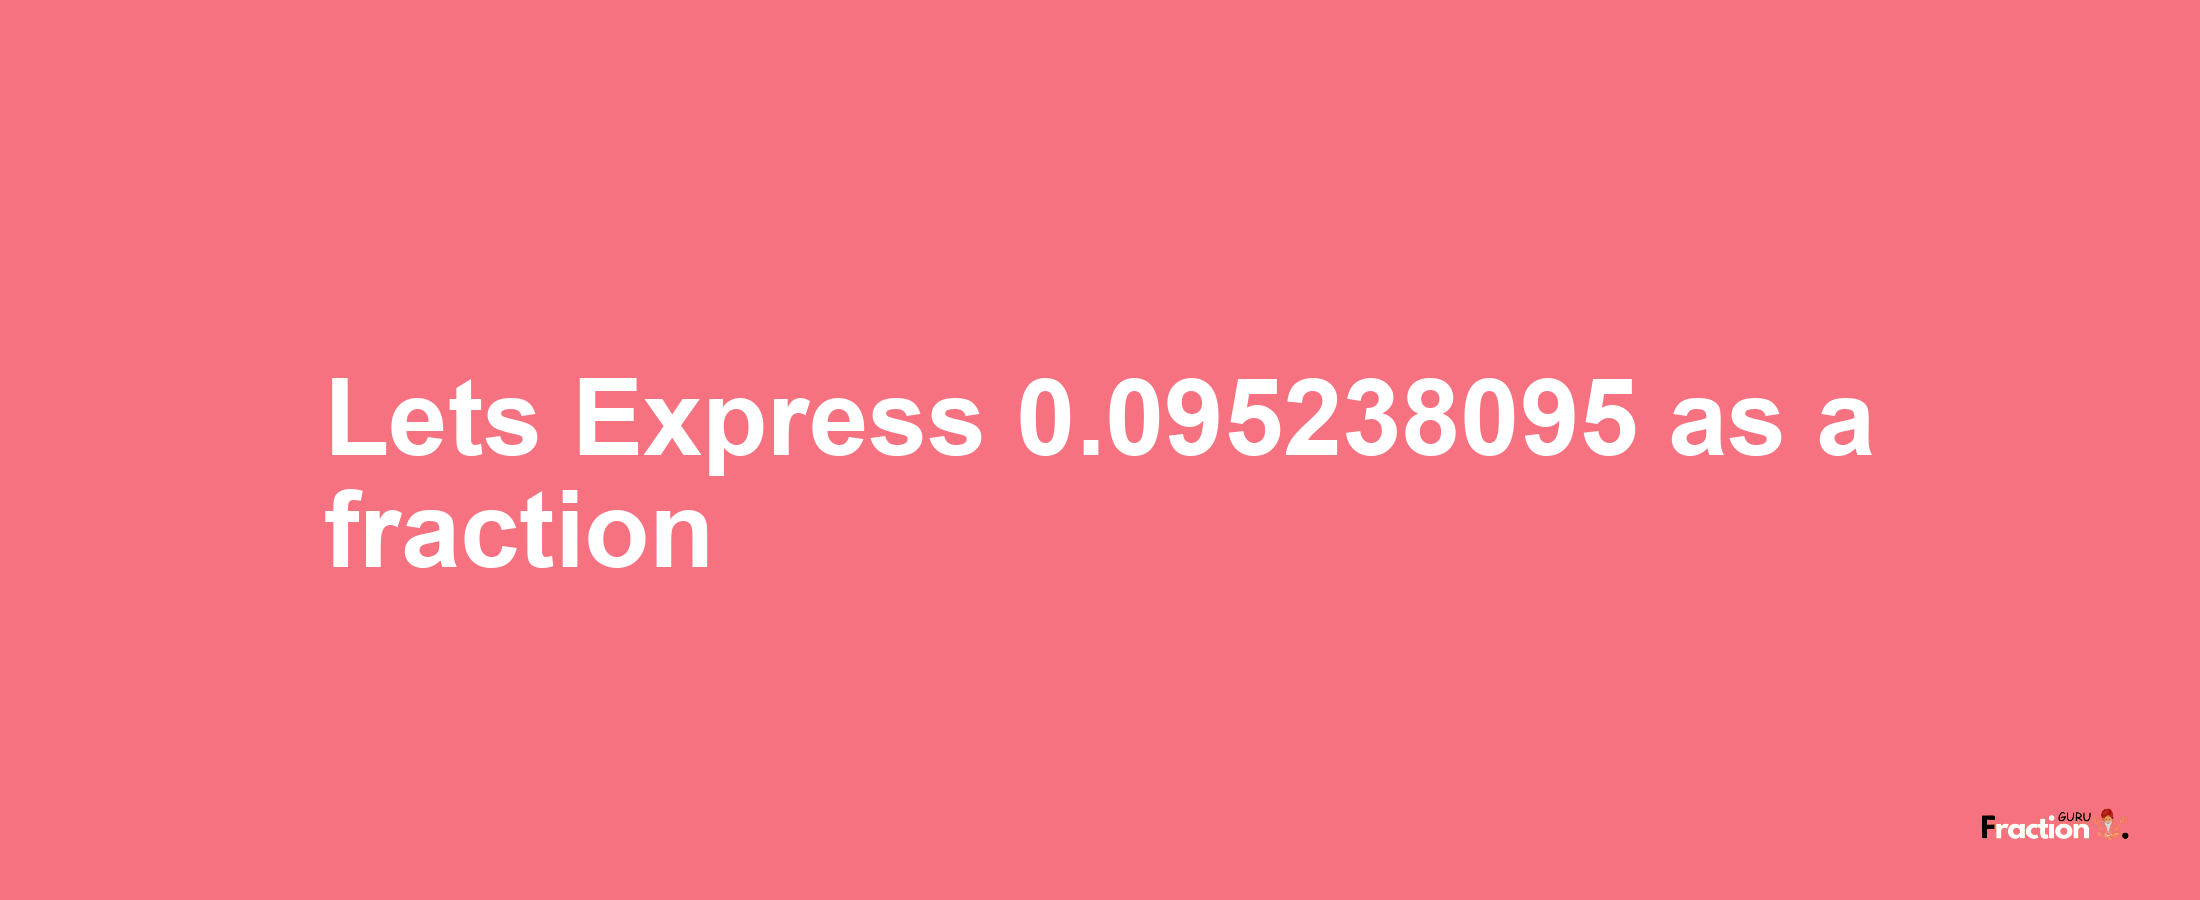 Lets Express 0.095238095 as afraction